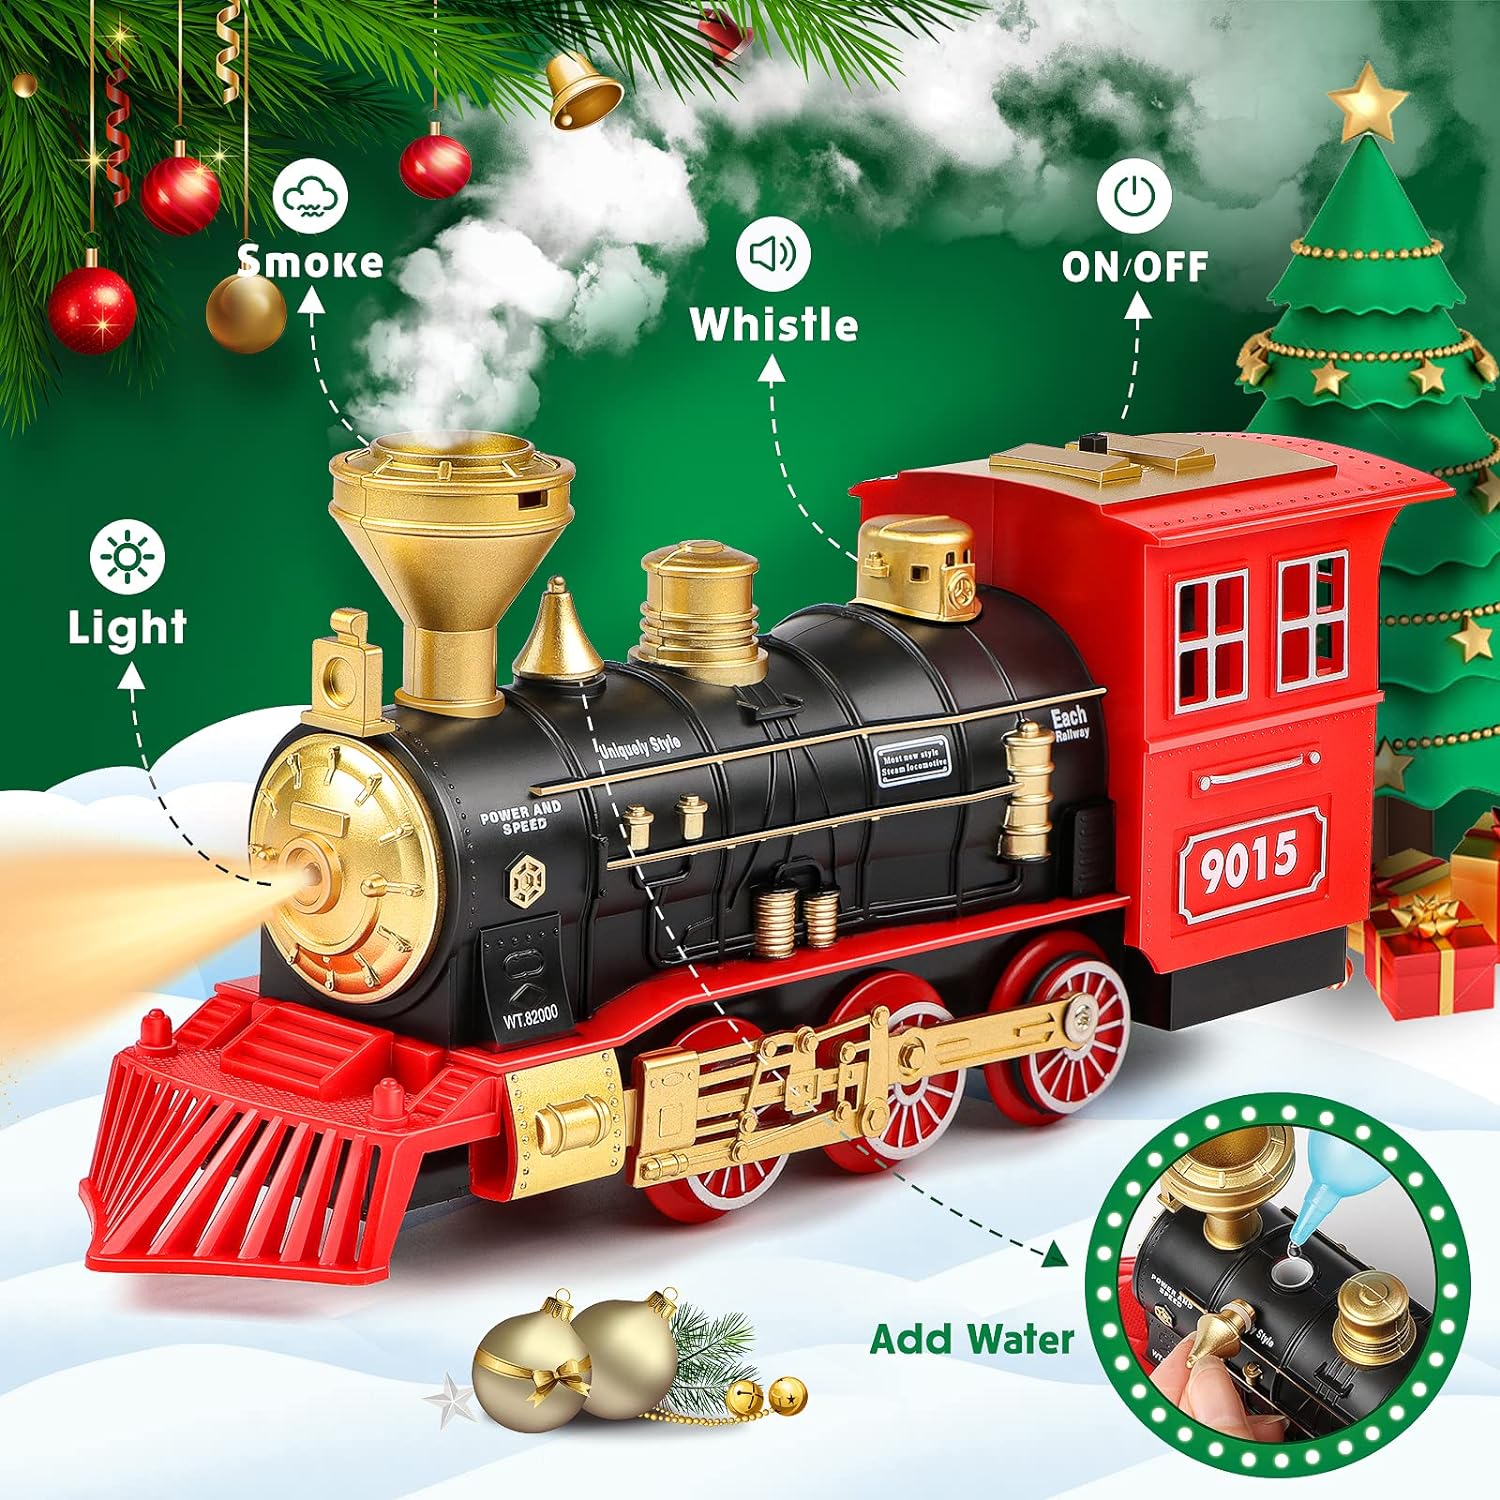 Hot Bee Train Set - Train Toys for Boys Girls w/Smokes, Lights & Sound, Tracks, Toy Train w/Steam Locomotive Engine, Cargo Cars & Tracks, Christmas Train Toys Gifts for 3 4 5 6 7 8+ Year Old Kids